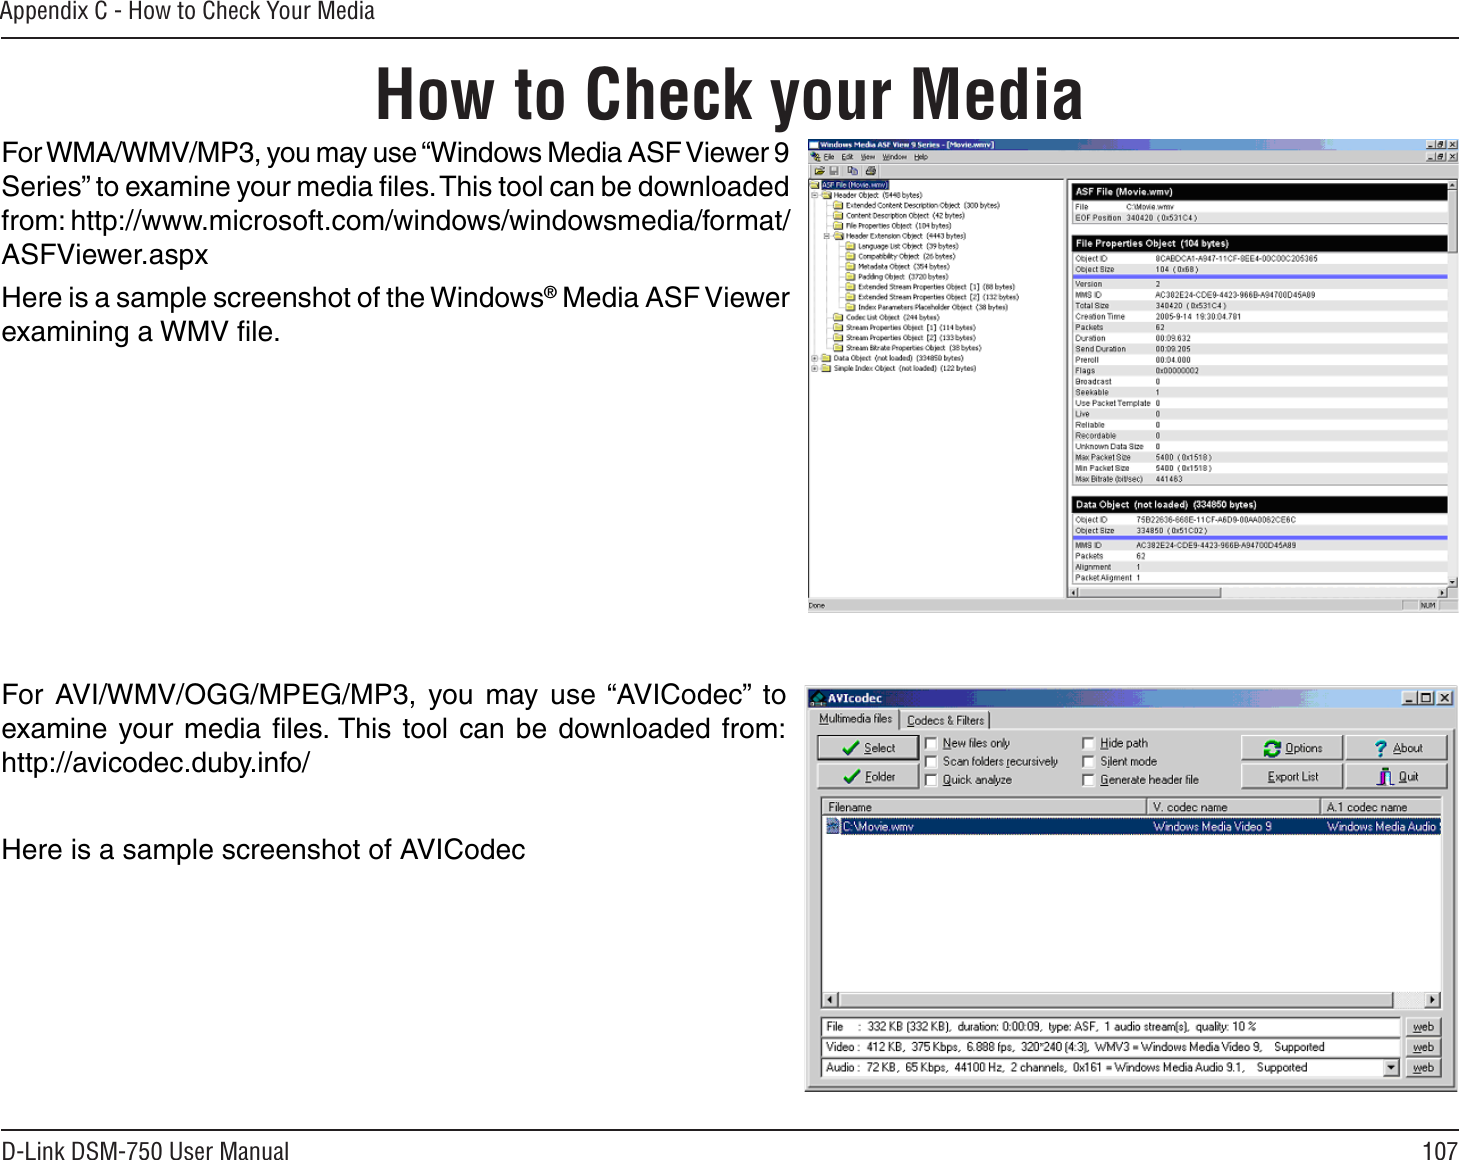 107D-Link DSM-750 User ManualAppendix C - How to Check Your MediaHow to Check your MediaFor WMA/WMV/MP3, you may use “Windows Media ASF Viewer 9 Series” to examine your media ﬁles. This tool can be downloaded from: http://www.microsoft.com/windows/windowsmedia/format/ASFViewer.aspxHere is a sample screenshot of the Windows® Media ASF Viewer examining a WMV ﬁle.For AVI/WMV/OGG/MPEG/MP3, you may use “AVICodec” to examine your media ﬁles. This tool can be downloaded from:http://avicodec.duby.info/Here is a sample screenshot of AVICodec 